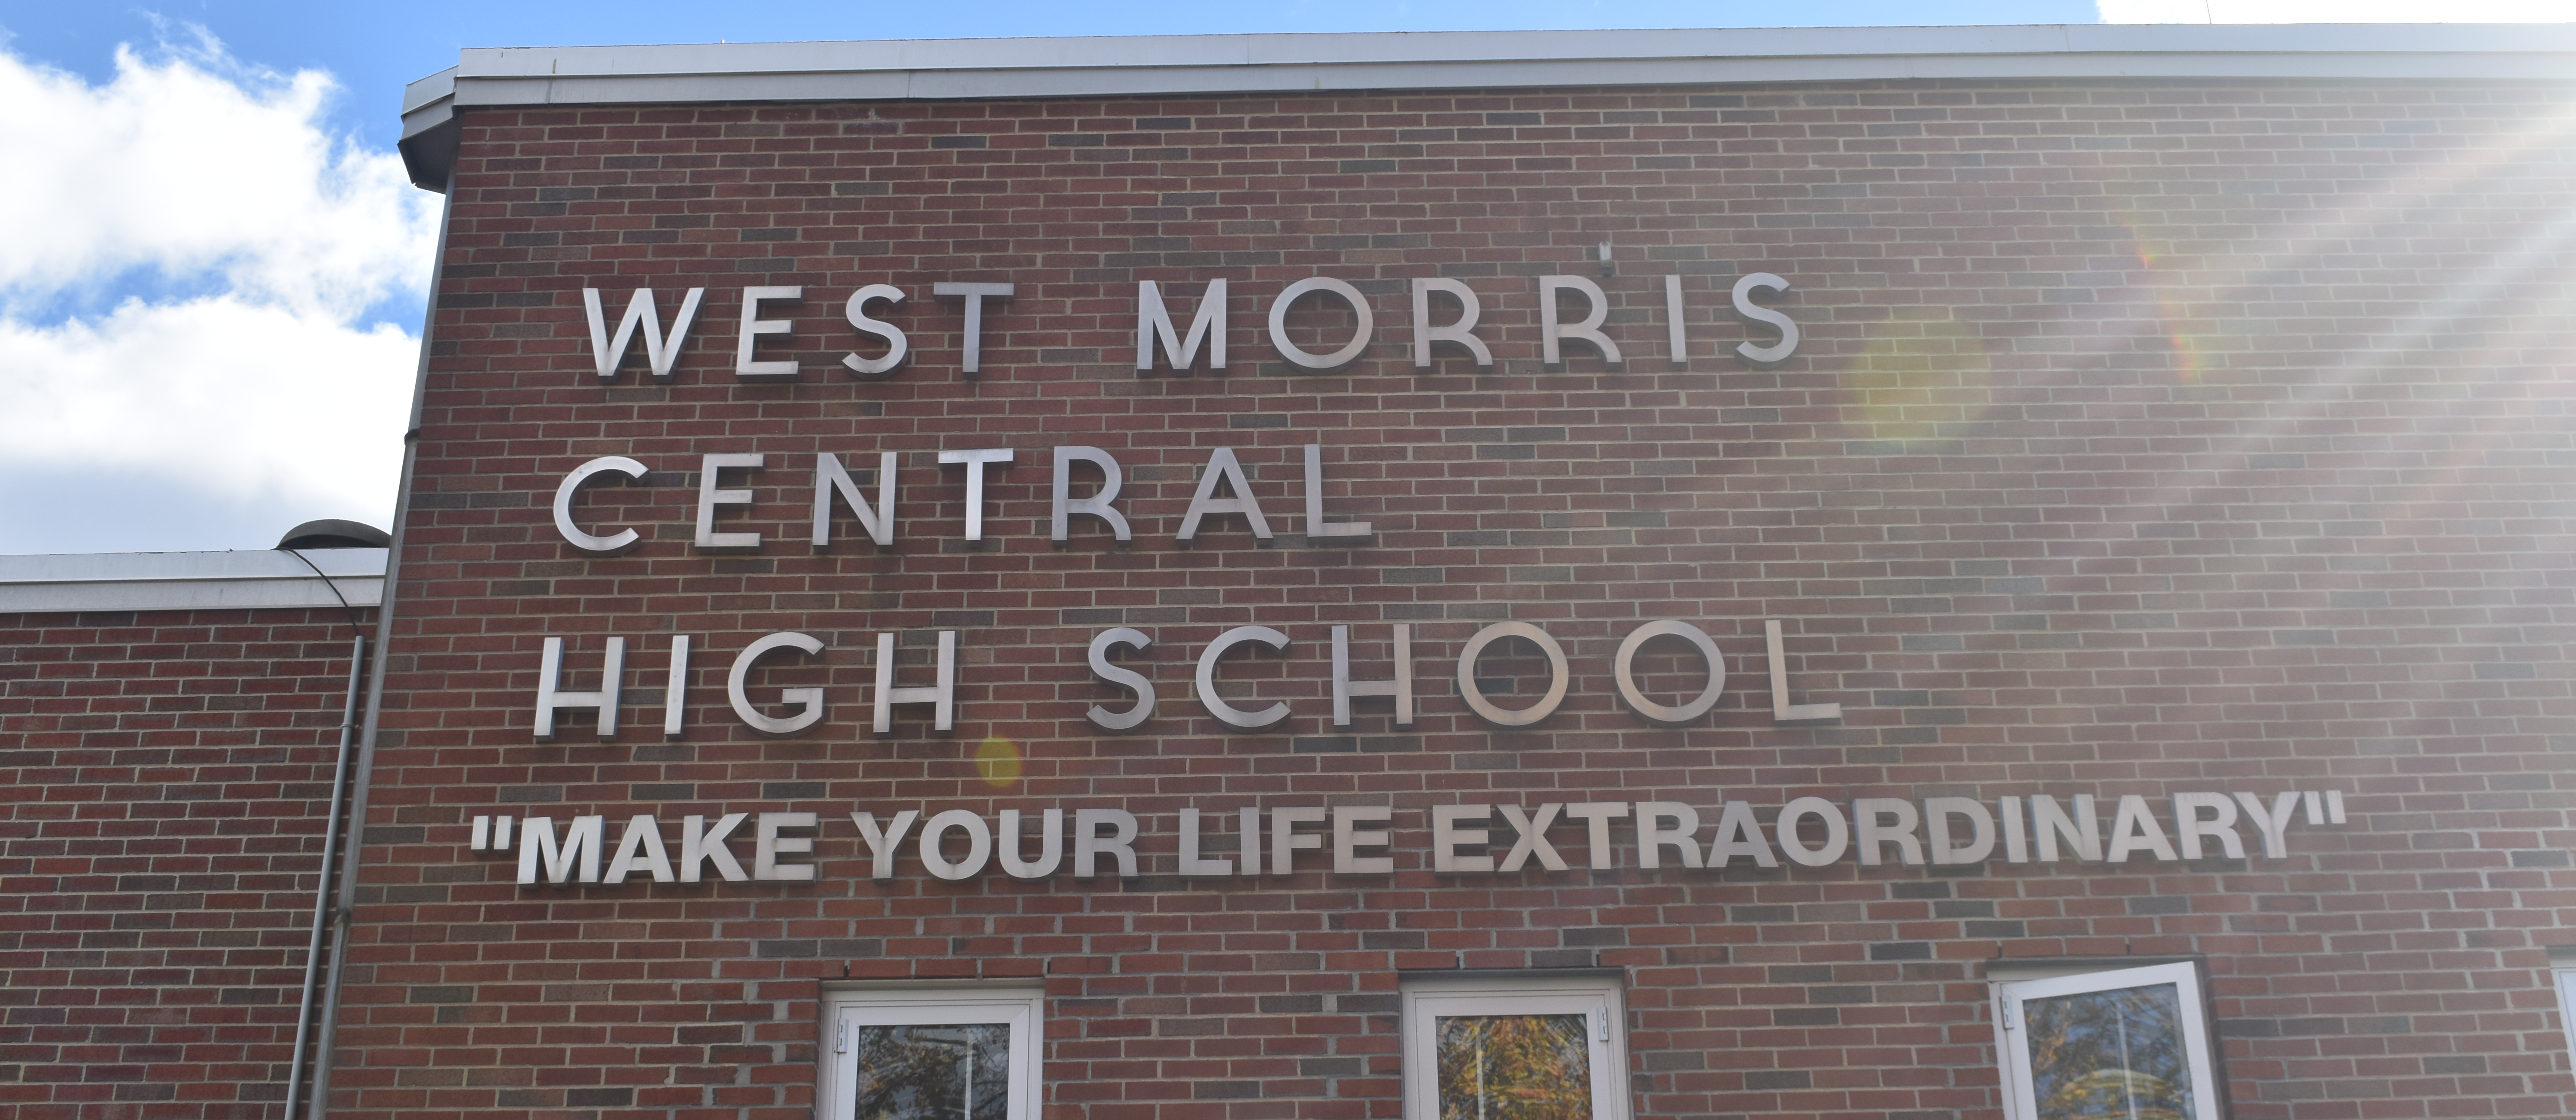 West Morris Central High School building; "Make Your Life Extraordinary"